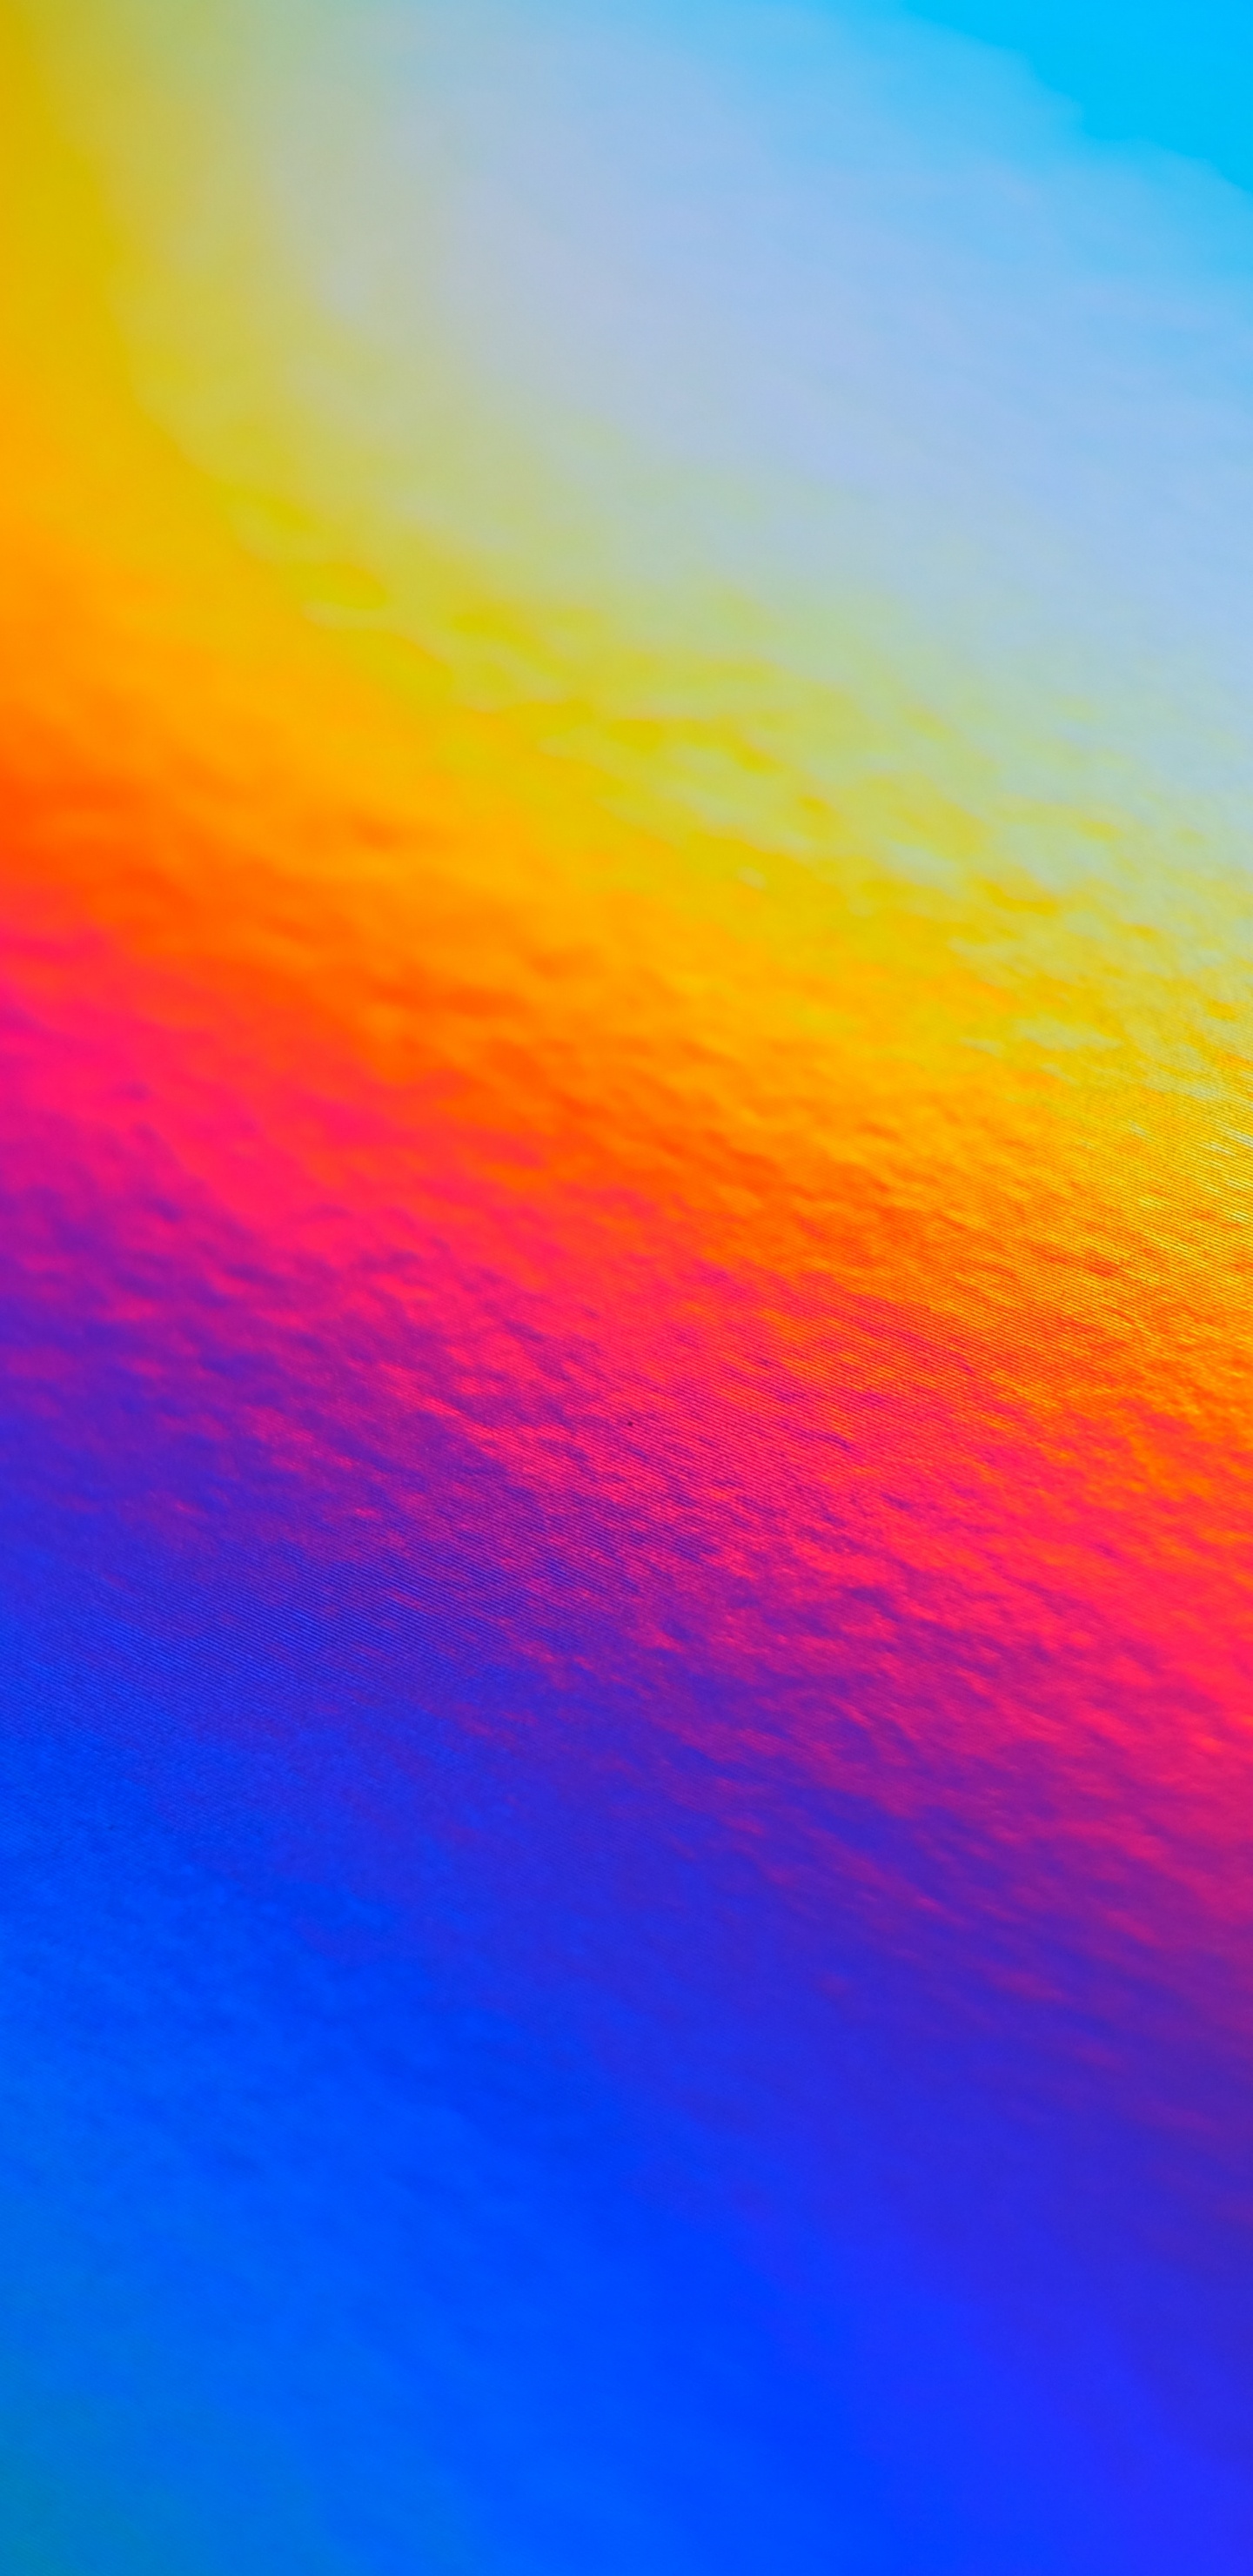 Orange and Blue Abstract Painting. Wallpaper in 1440x2960 Resolution